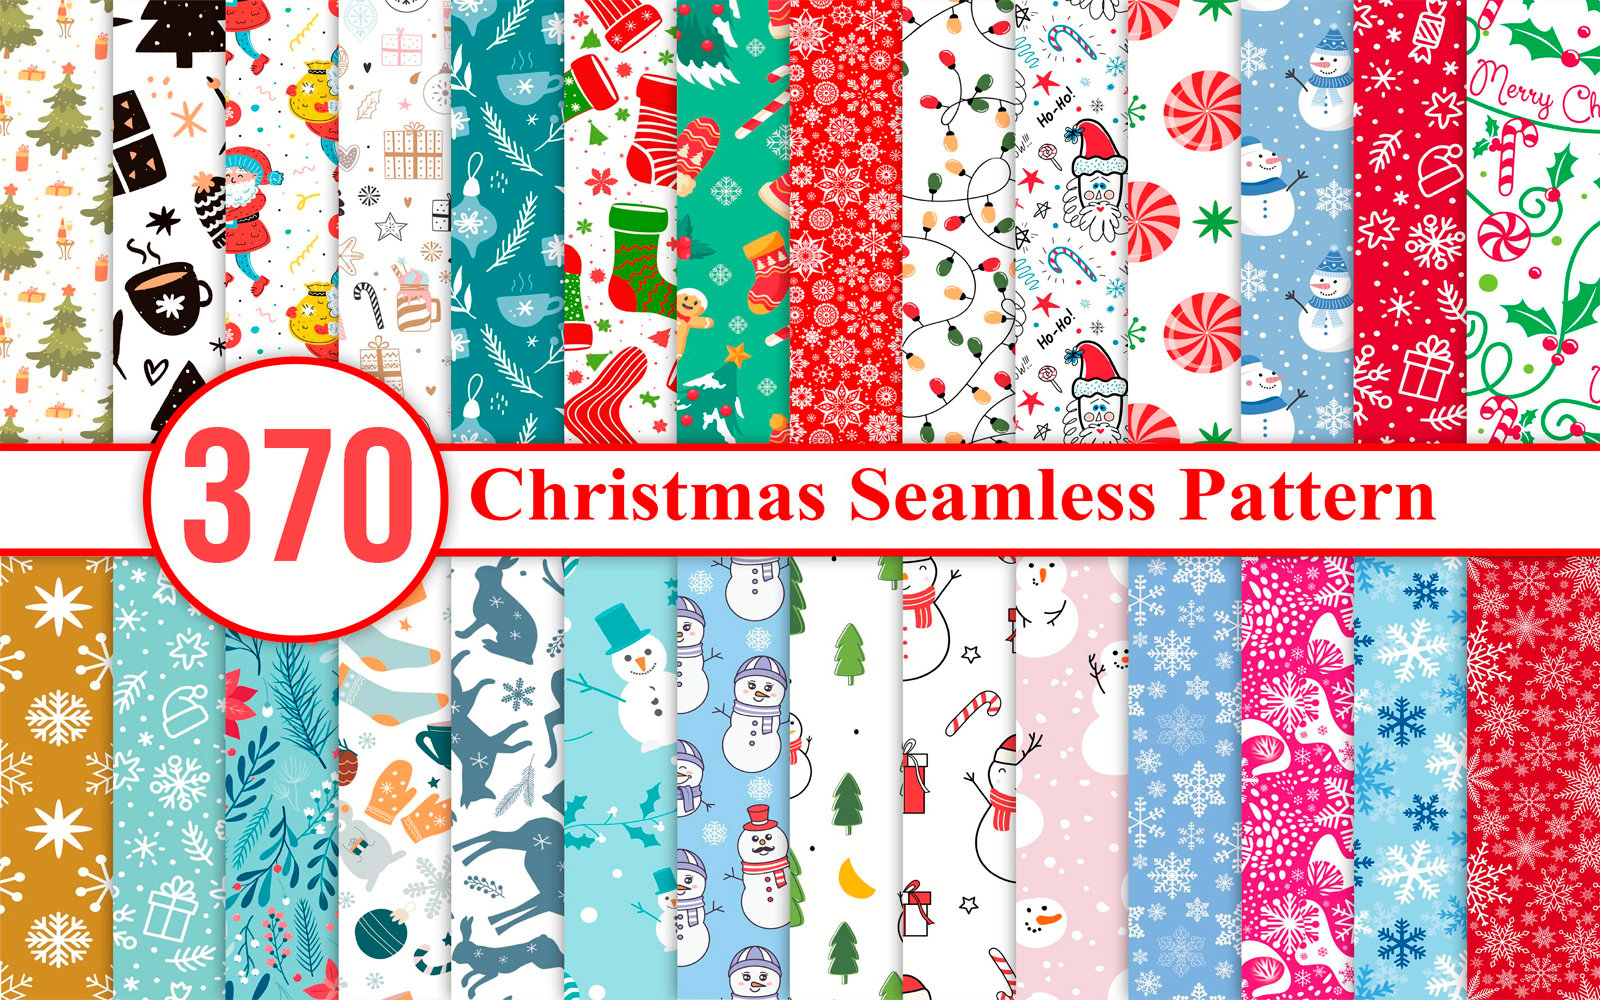 Template #374466 Pattern Christmas Webdesign Template - Logo template Preview